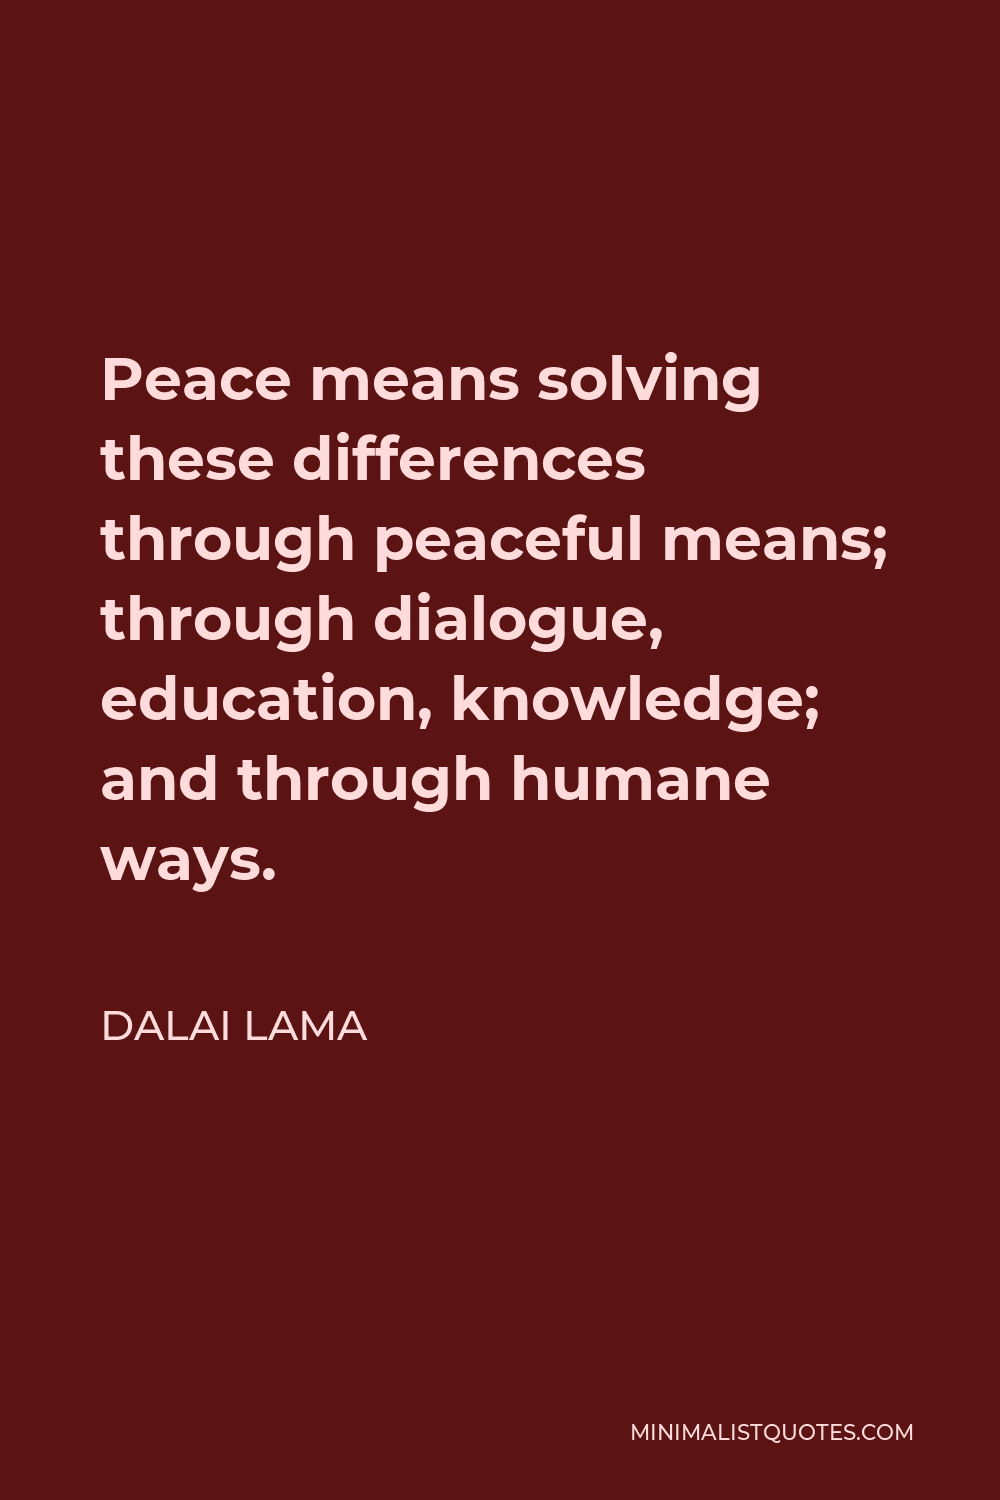 Dalai Lama Quote - Peace means solving these differences through peaceful means; through dialogue, education, knowledge; and through humane ways.